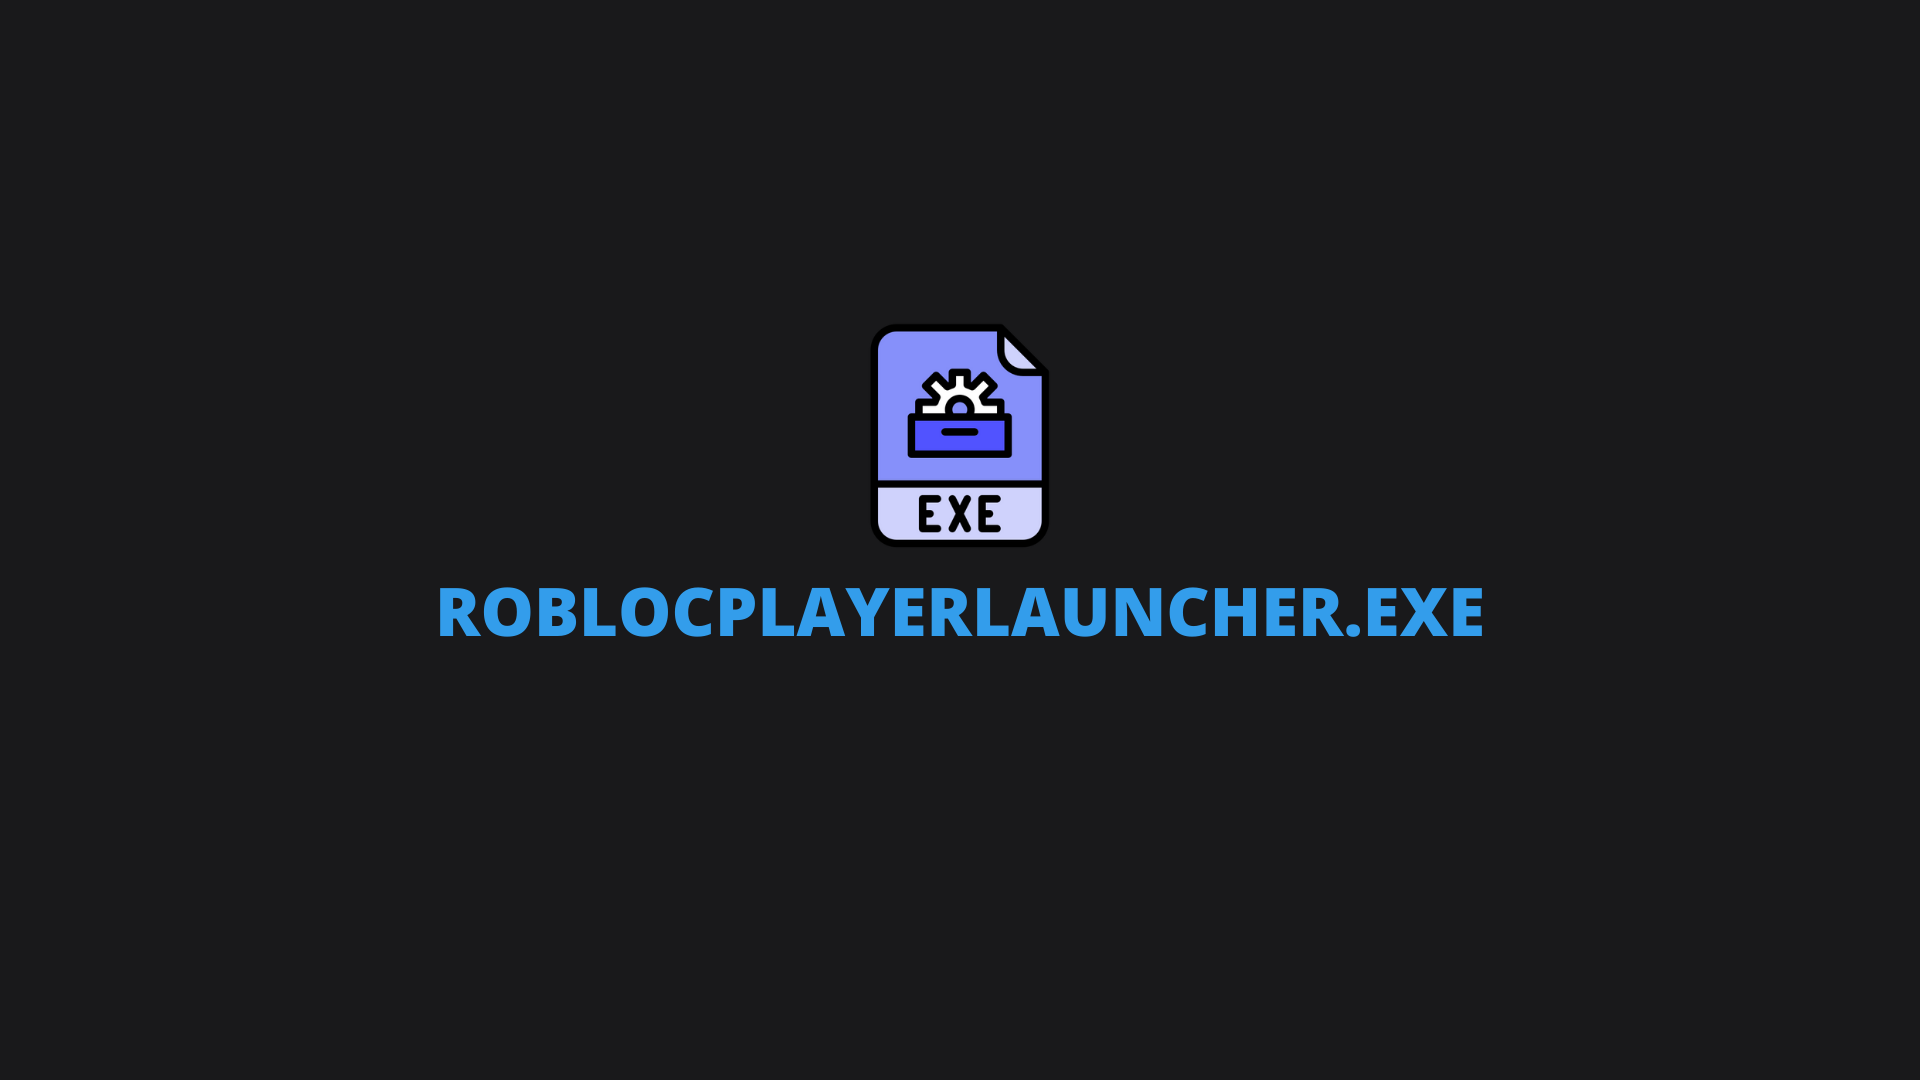 What Is RobloxPlayerLauncher.exe? Is It a Virus?